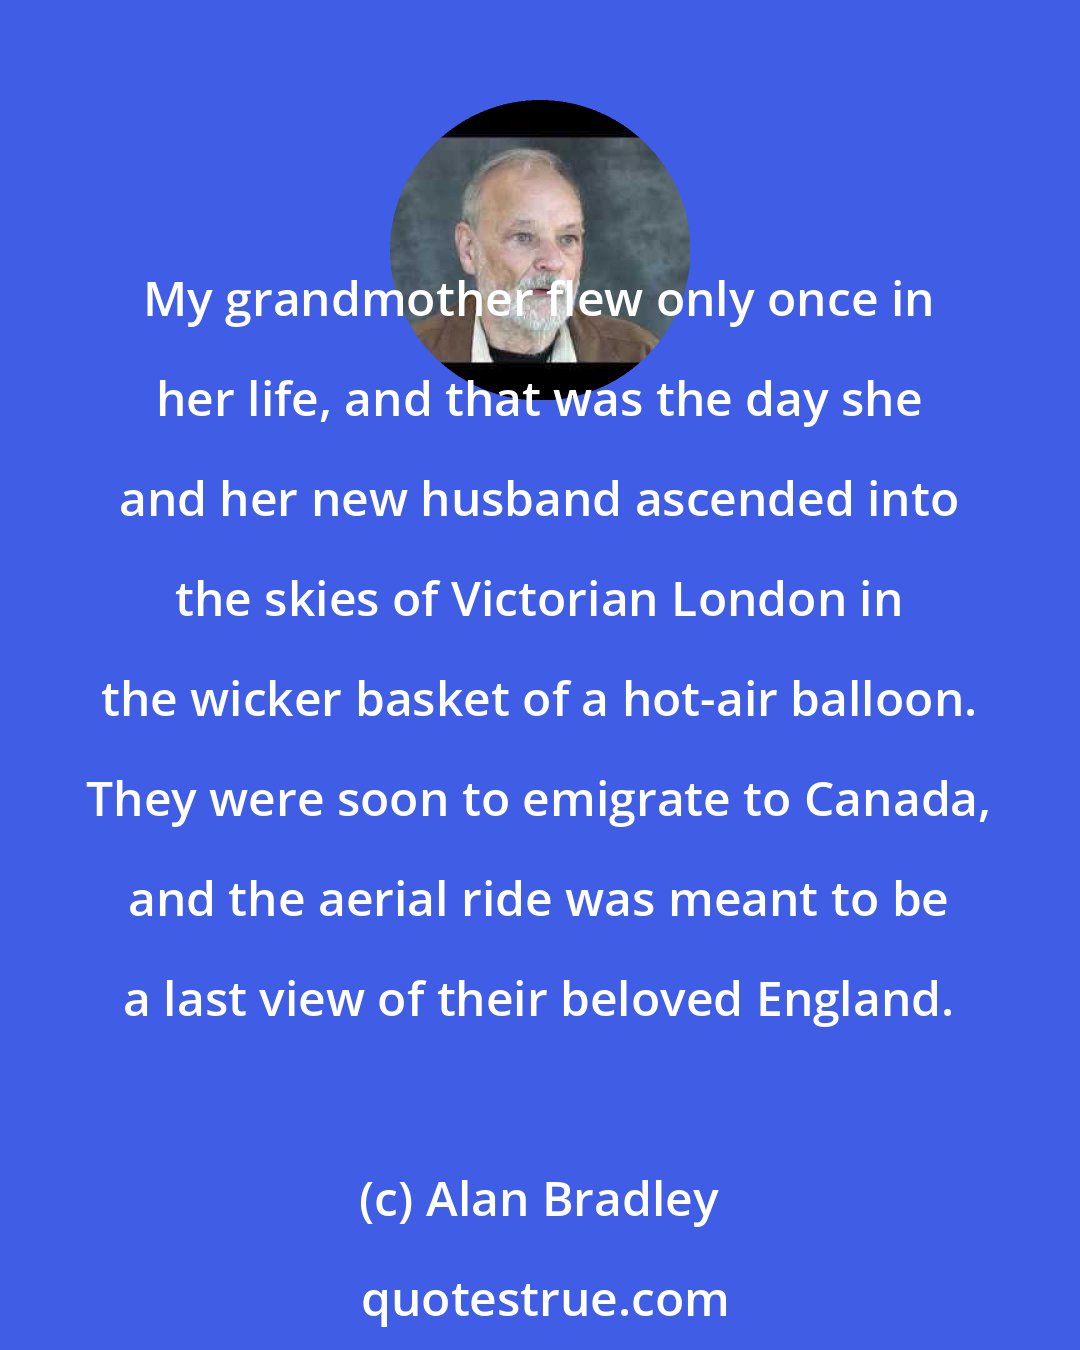 Alan Bradley: My grandmother flew only once in her life, and that was the day she and her new husband ascended into the skies of Victorian London in the wicker basket of a hot-air balloon. They were soon to emigrate to Canada, and the aerial ride was meant to be a last view of their beloved England.